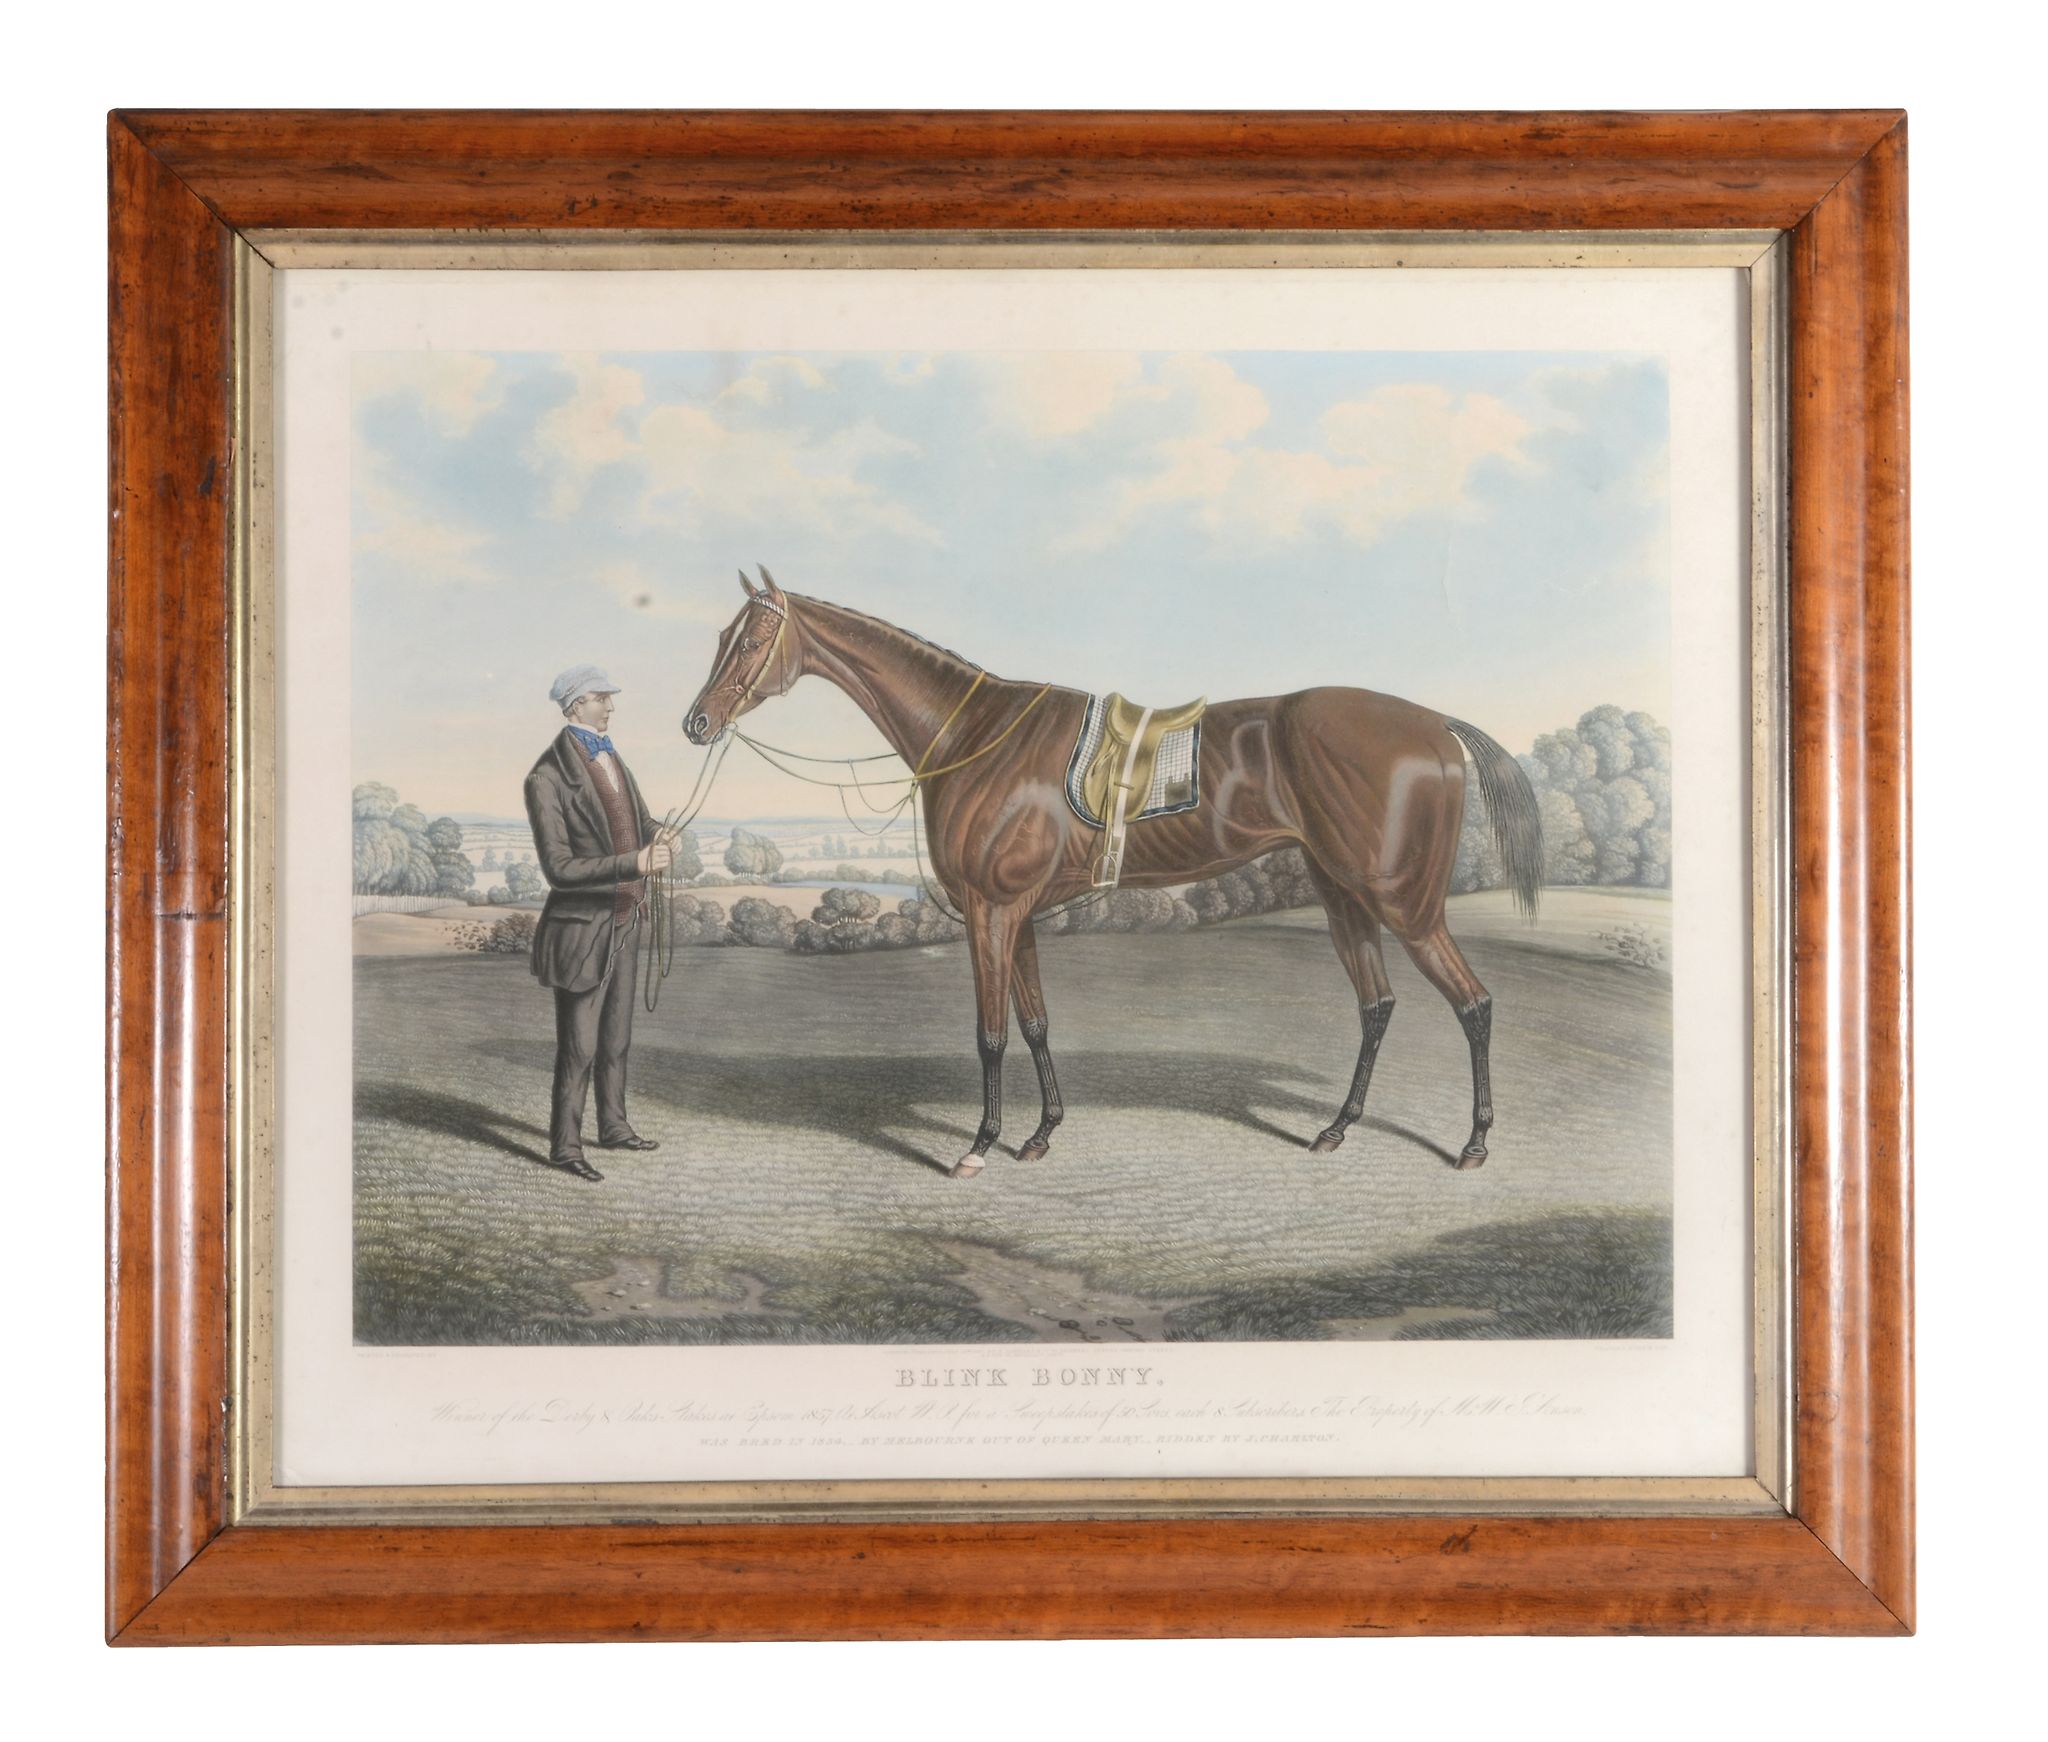 Charles Hunt & Son (19th Century) - Blink Bonny Etching and aquatint, printed in colour and finished